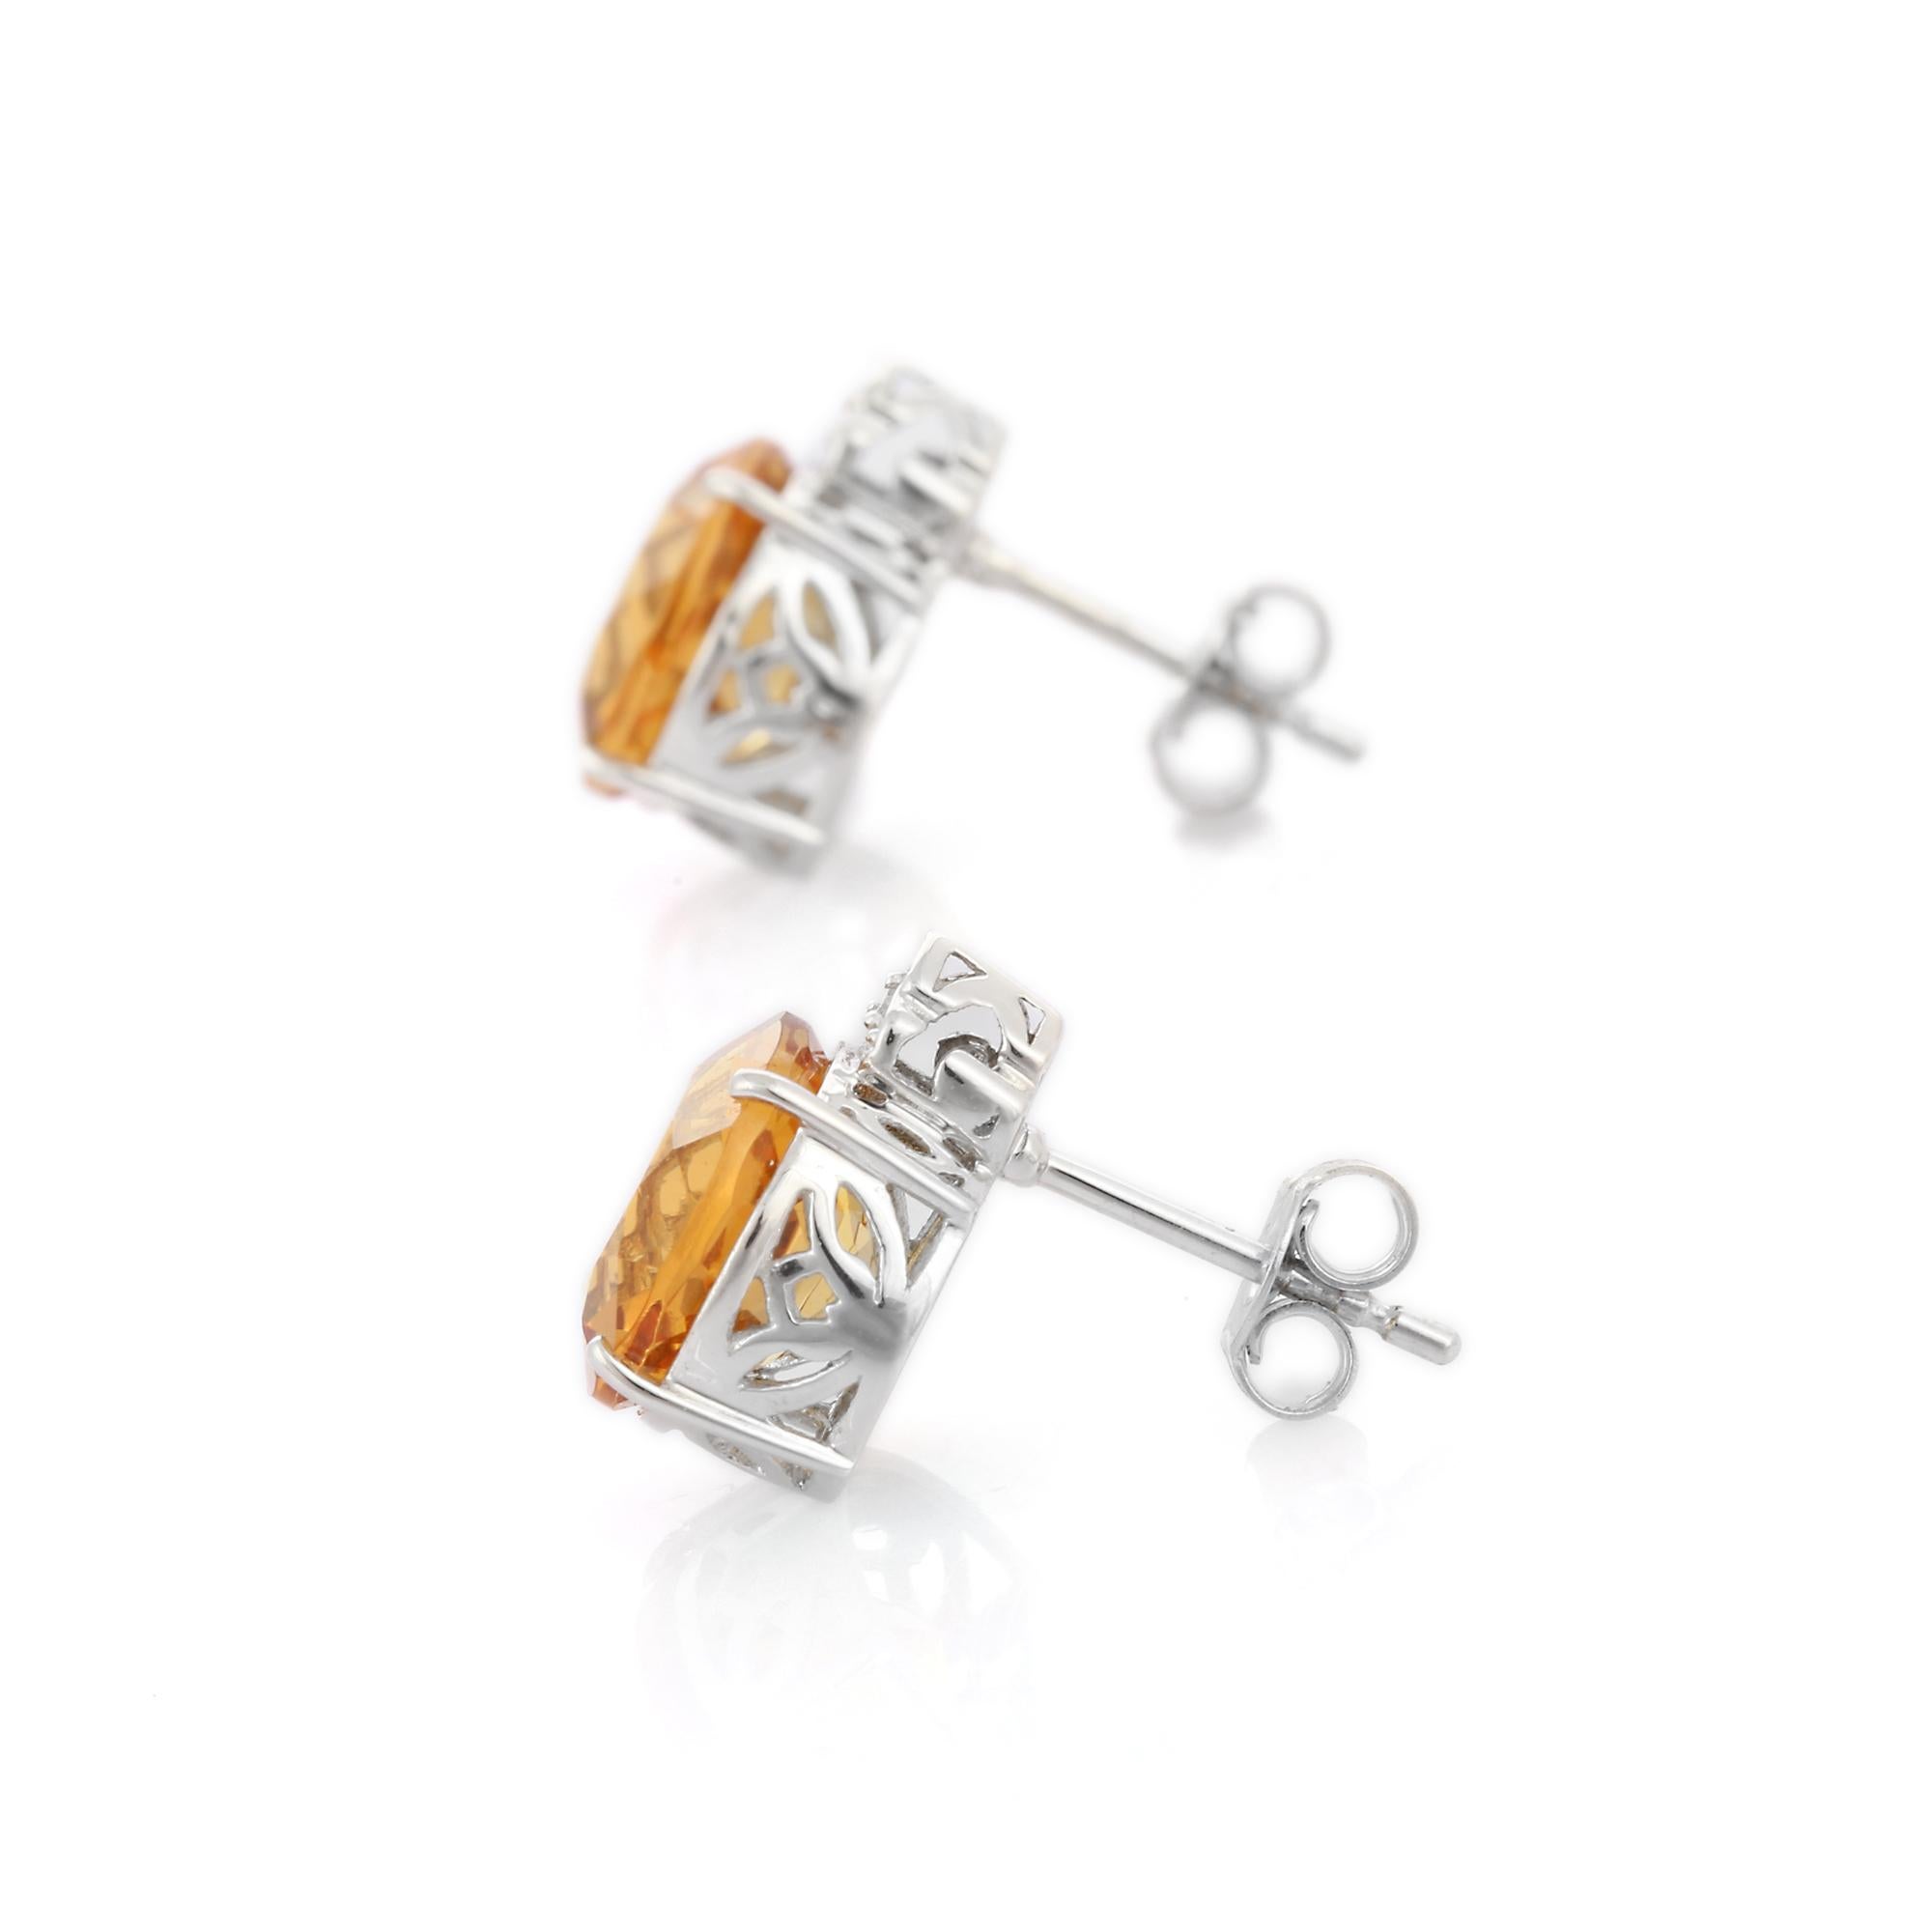 Studs create a subtle beauty while showcasing the colors of the natural precious gemstones and illuminating diamonds making a statement.

Round cut citrine studs with diamonds in 14K gold. Embrace your look with these stunning pair of earrings